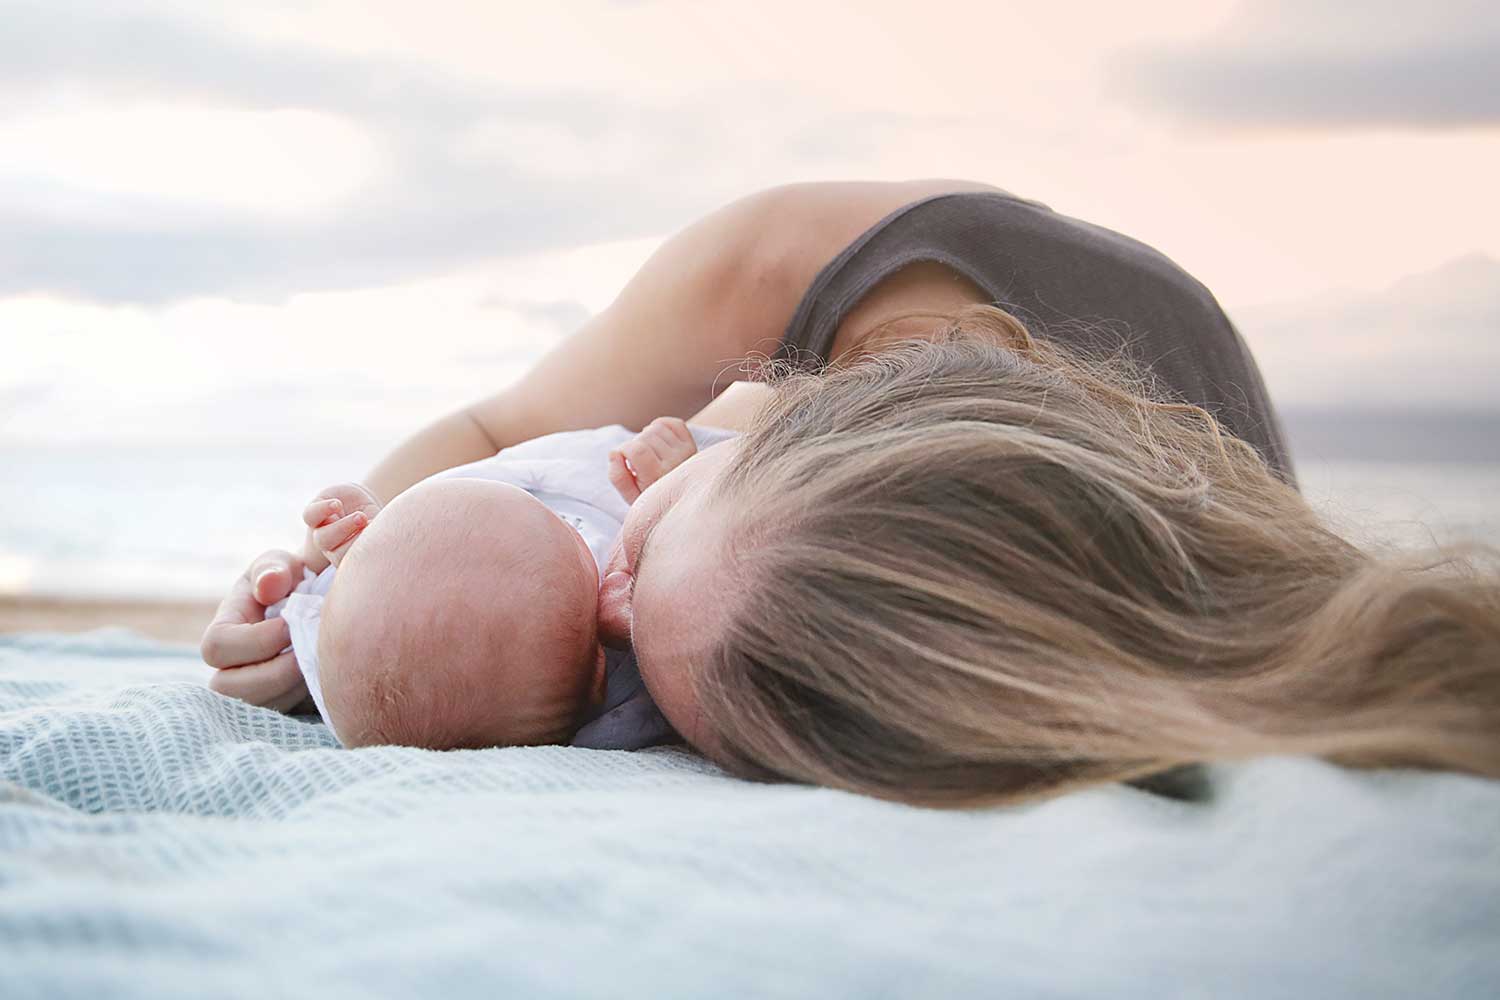 New mom rolls over on beach blanket and snuggles her new baby.